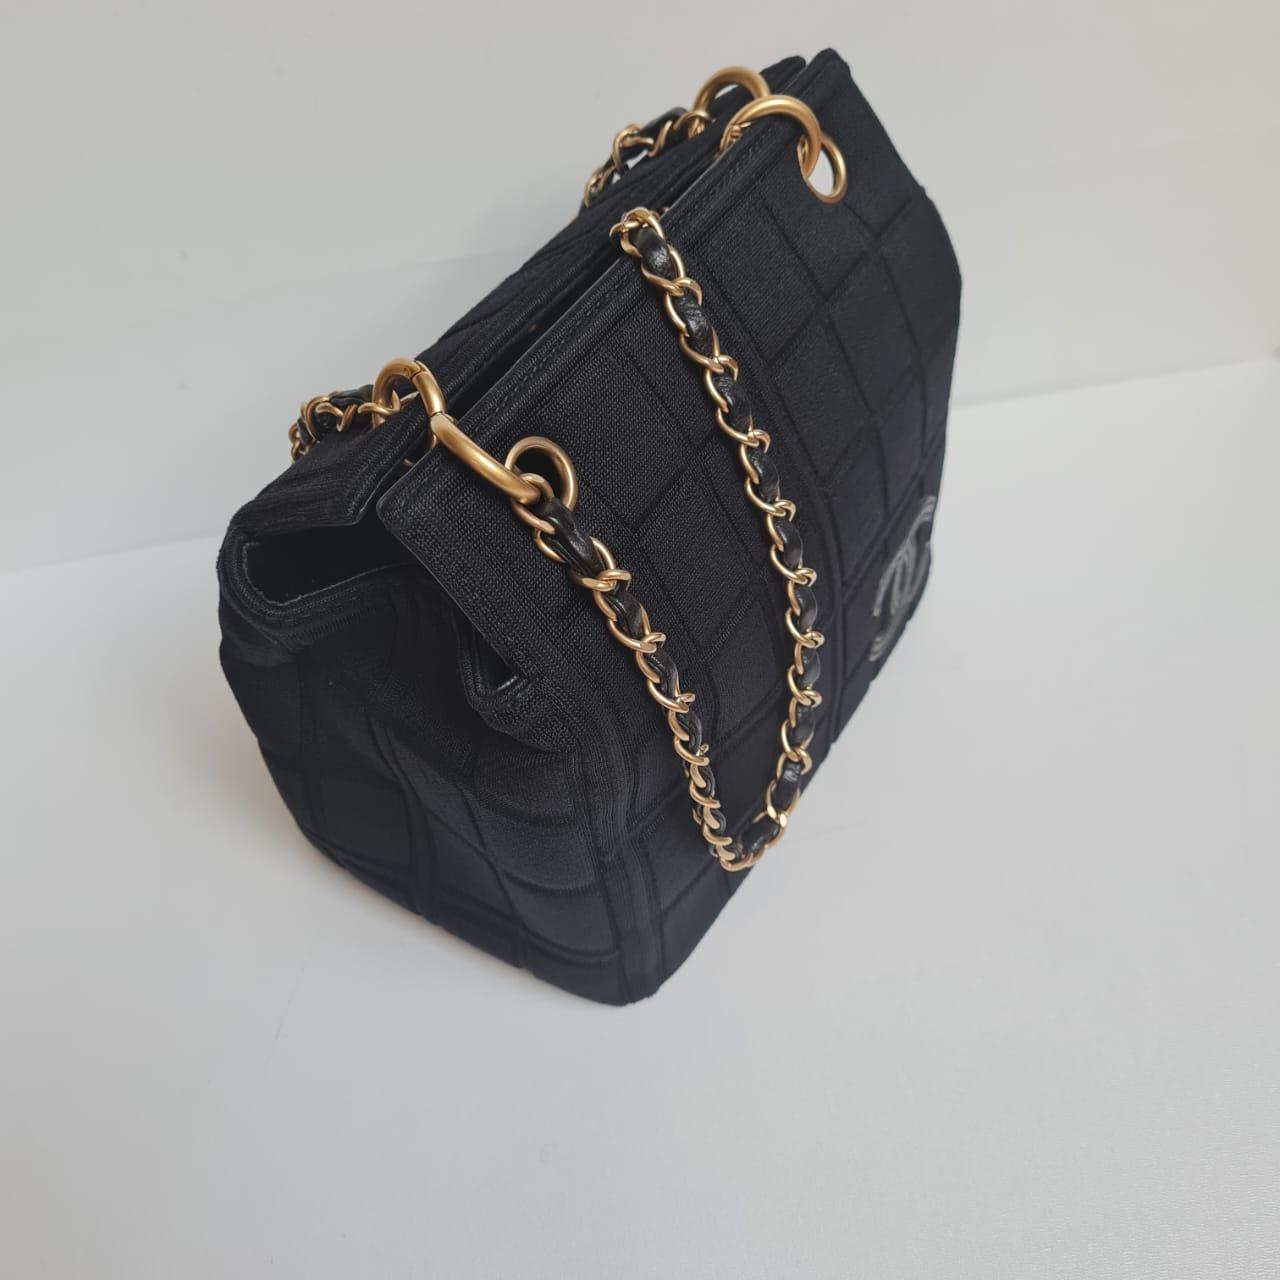 Vintage chanel chocolate bar quilted tote in black jersey. Overall in great condition, no visible rubbing on the jersey fabric. Light scratches on the leather flap top. Overall in great condition. Series #6. Comes with its authenticity card. 